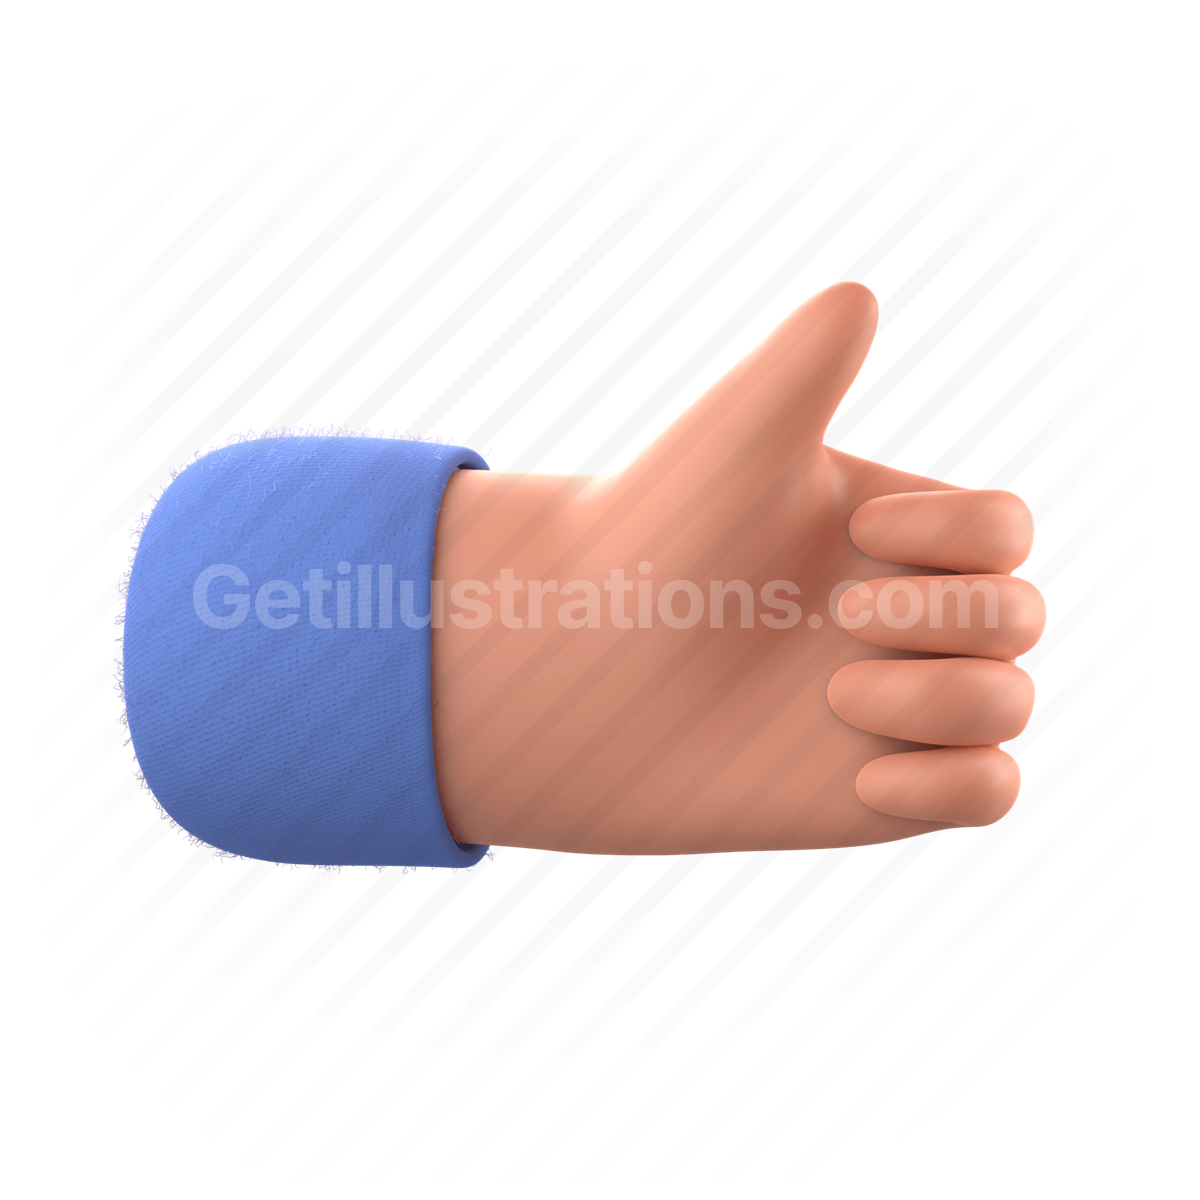 hand gestures, hand, gesture, emoticon, emoji, thumbs up, yes, approve, like, light